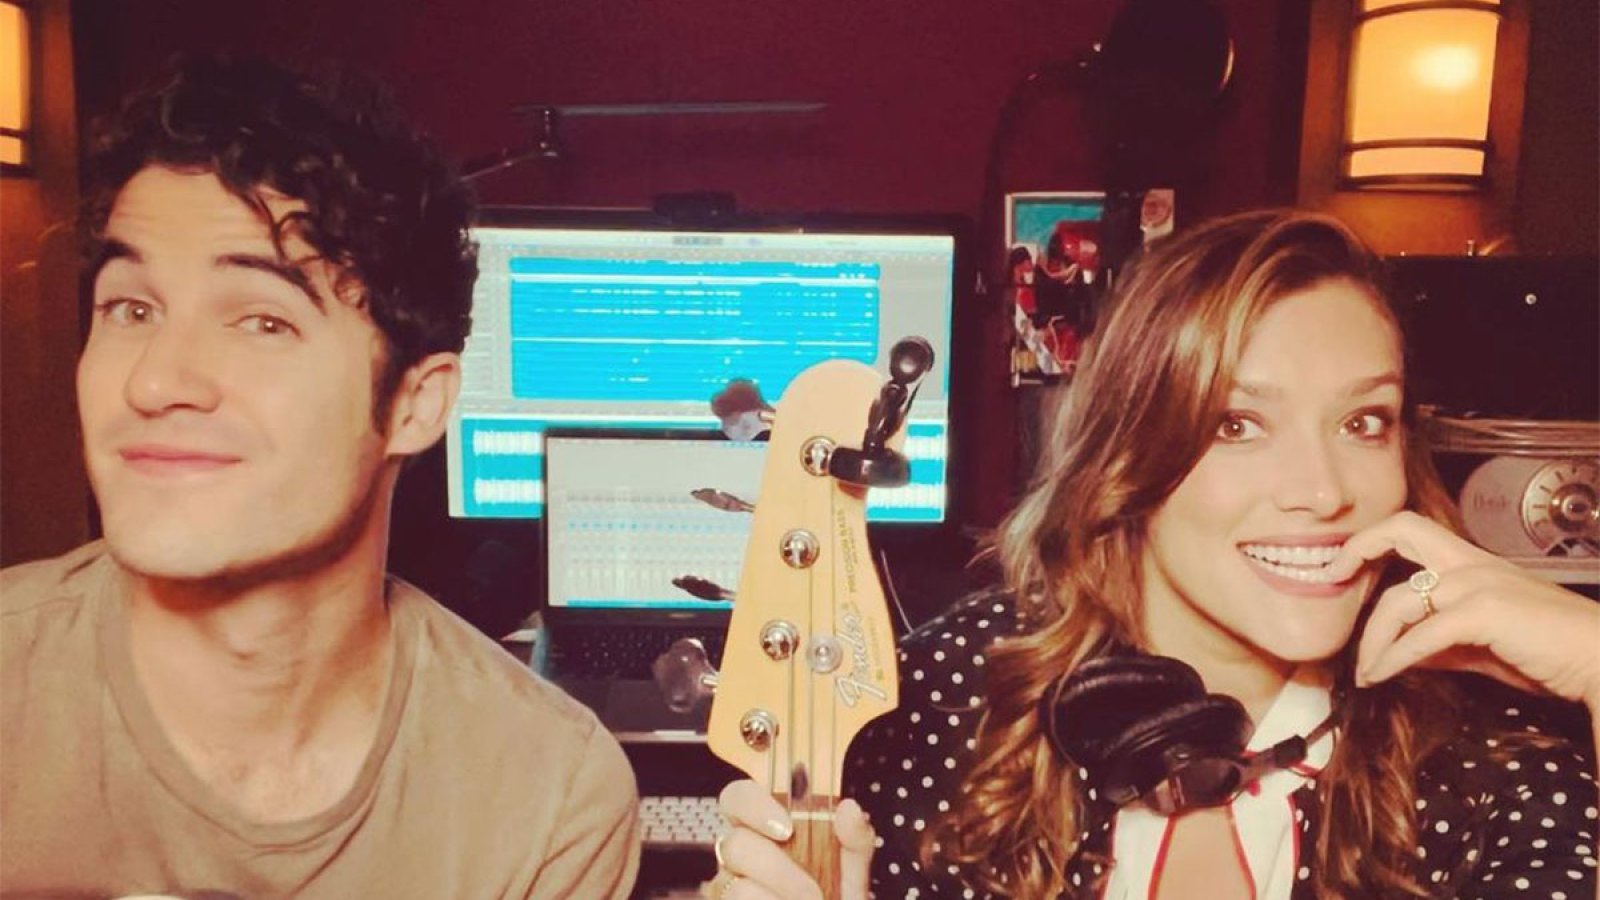 Darren Criss and Wife Mia Swier Are Expecting Their 1st Child: 'The Ultimate Collab Dropping